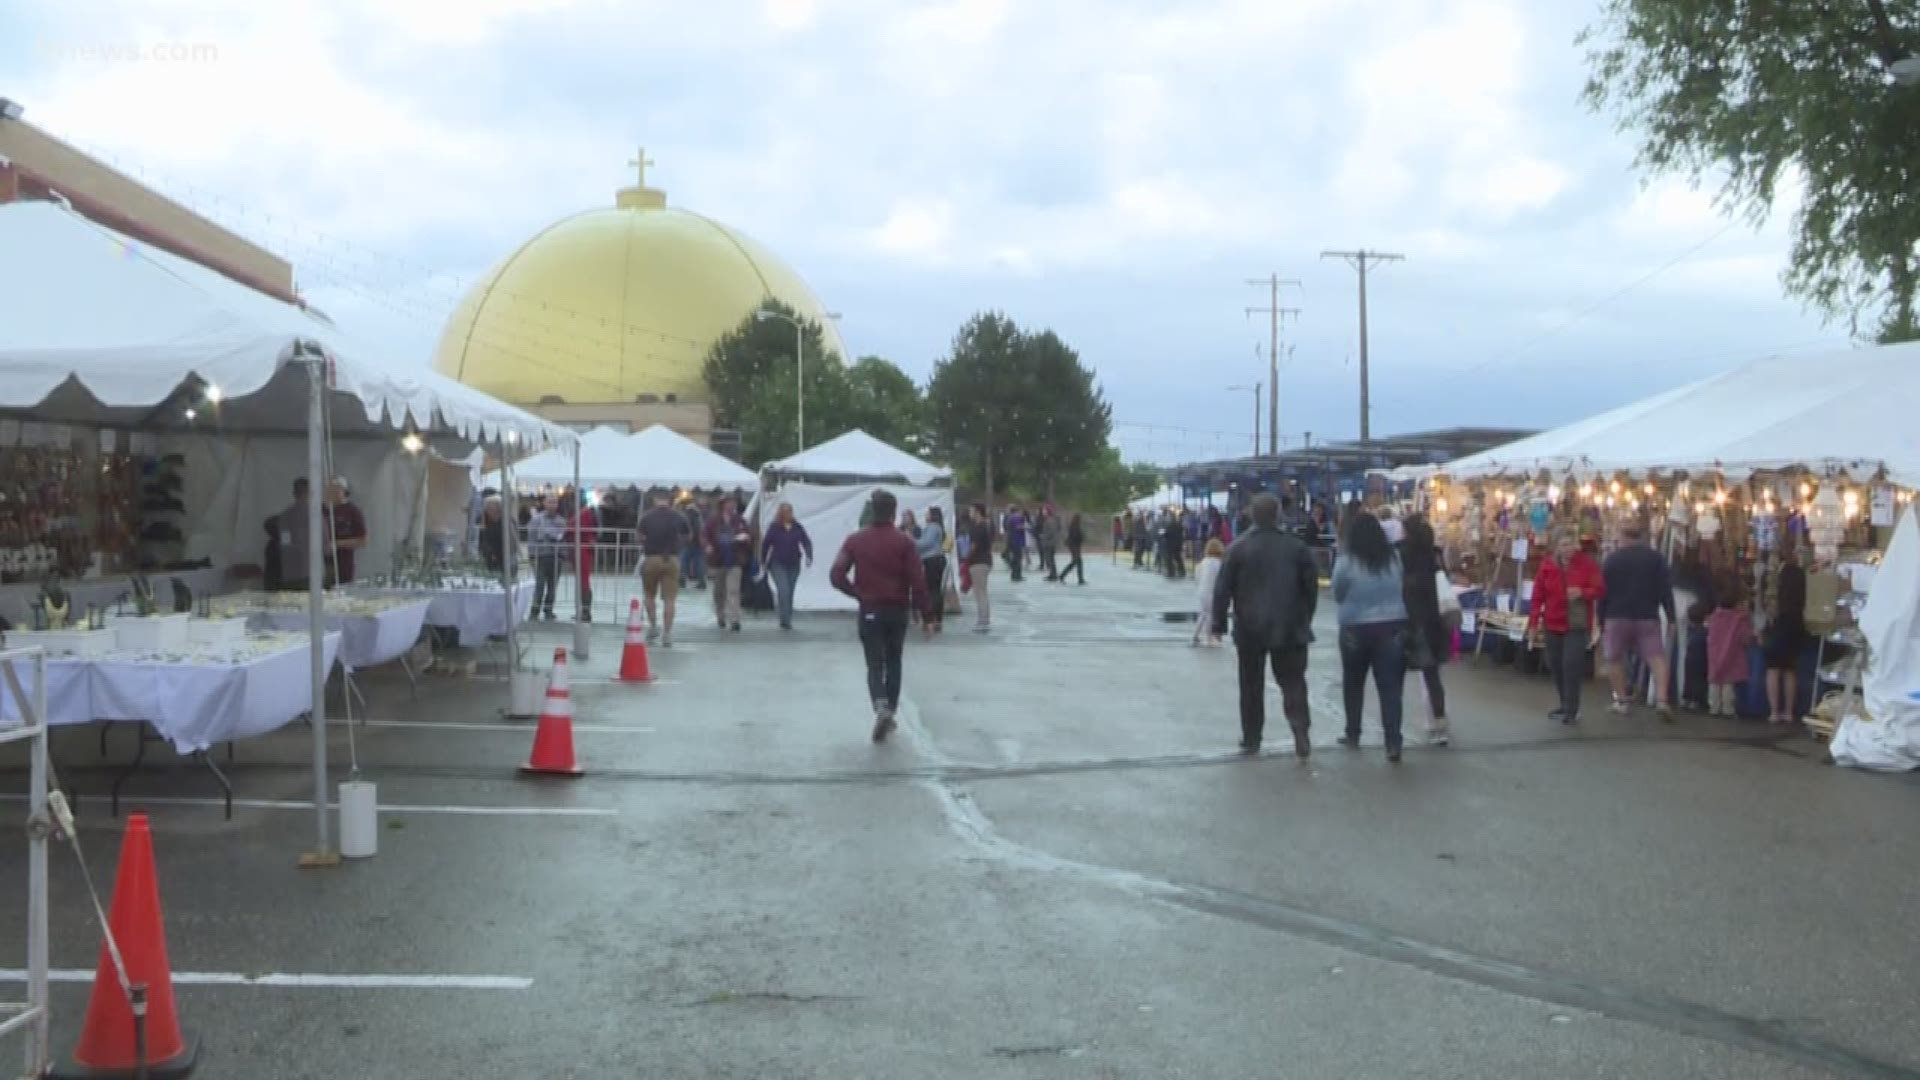 Summer is officially here, but it sure didn’t feel like it in Colorado Friday. The 54th annual Greek Festival kicked off to a soggy start, but organizers say the fun continues - rain or shine.